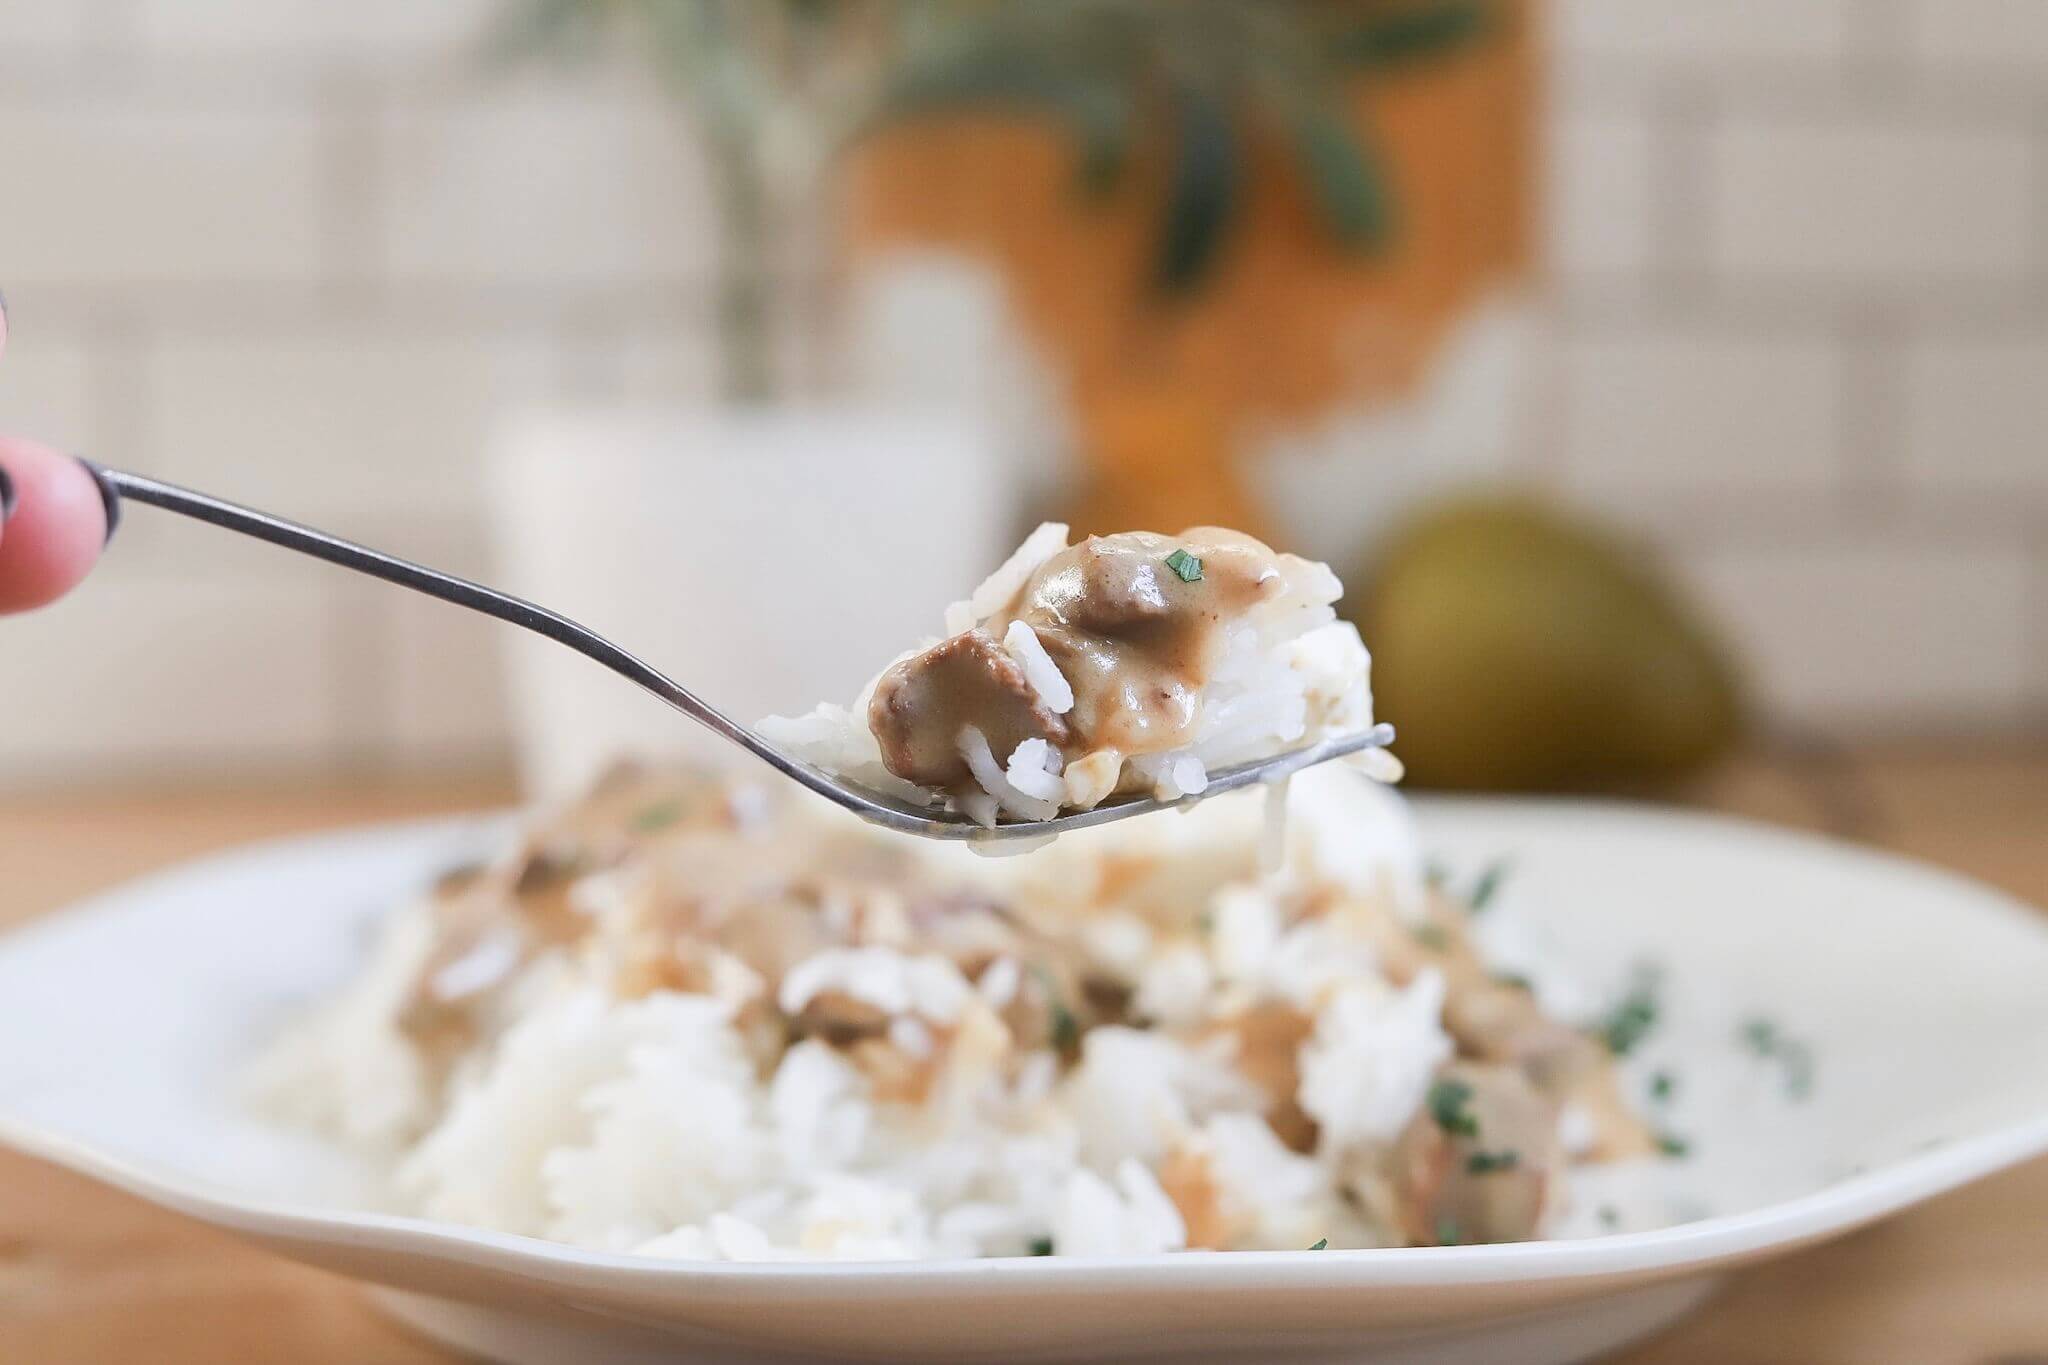 The Most Amazing Beef Stroganoff Recipe You Will Ever Make!